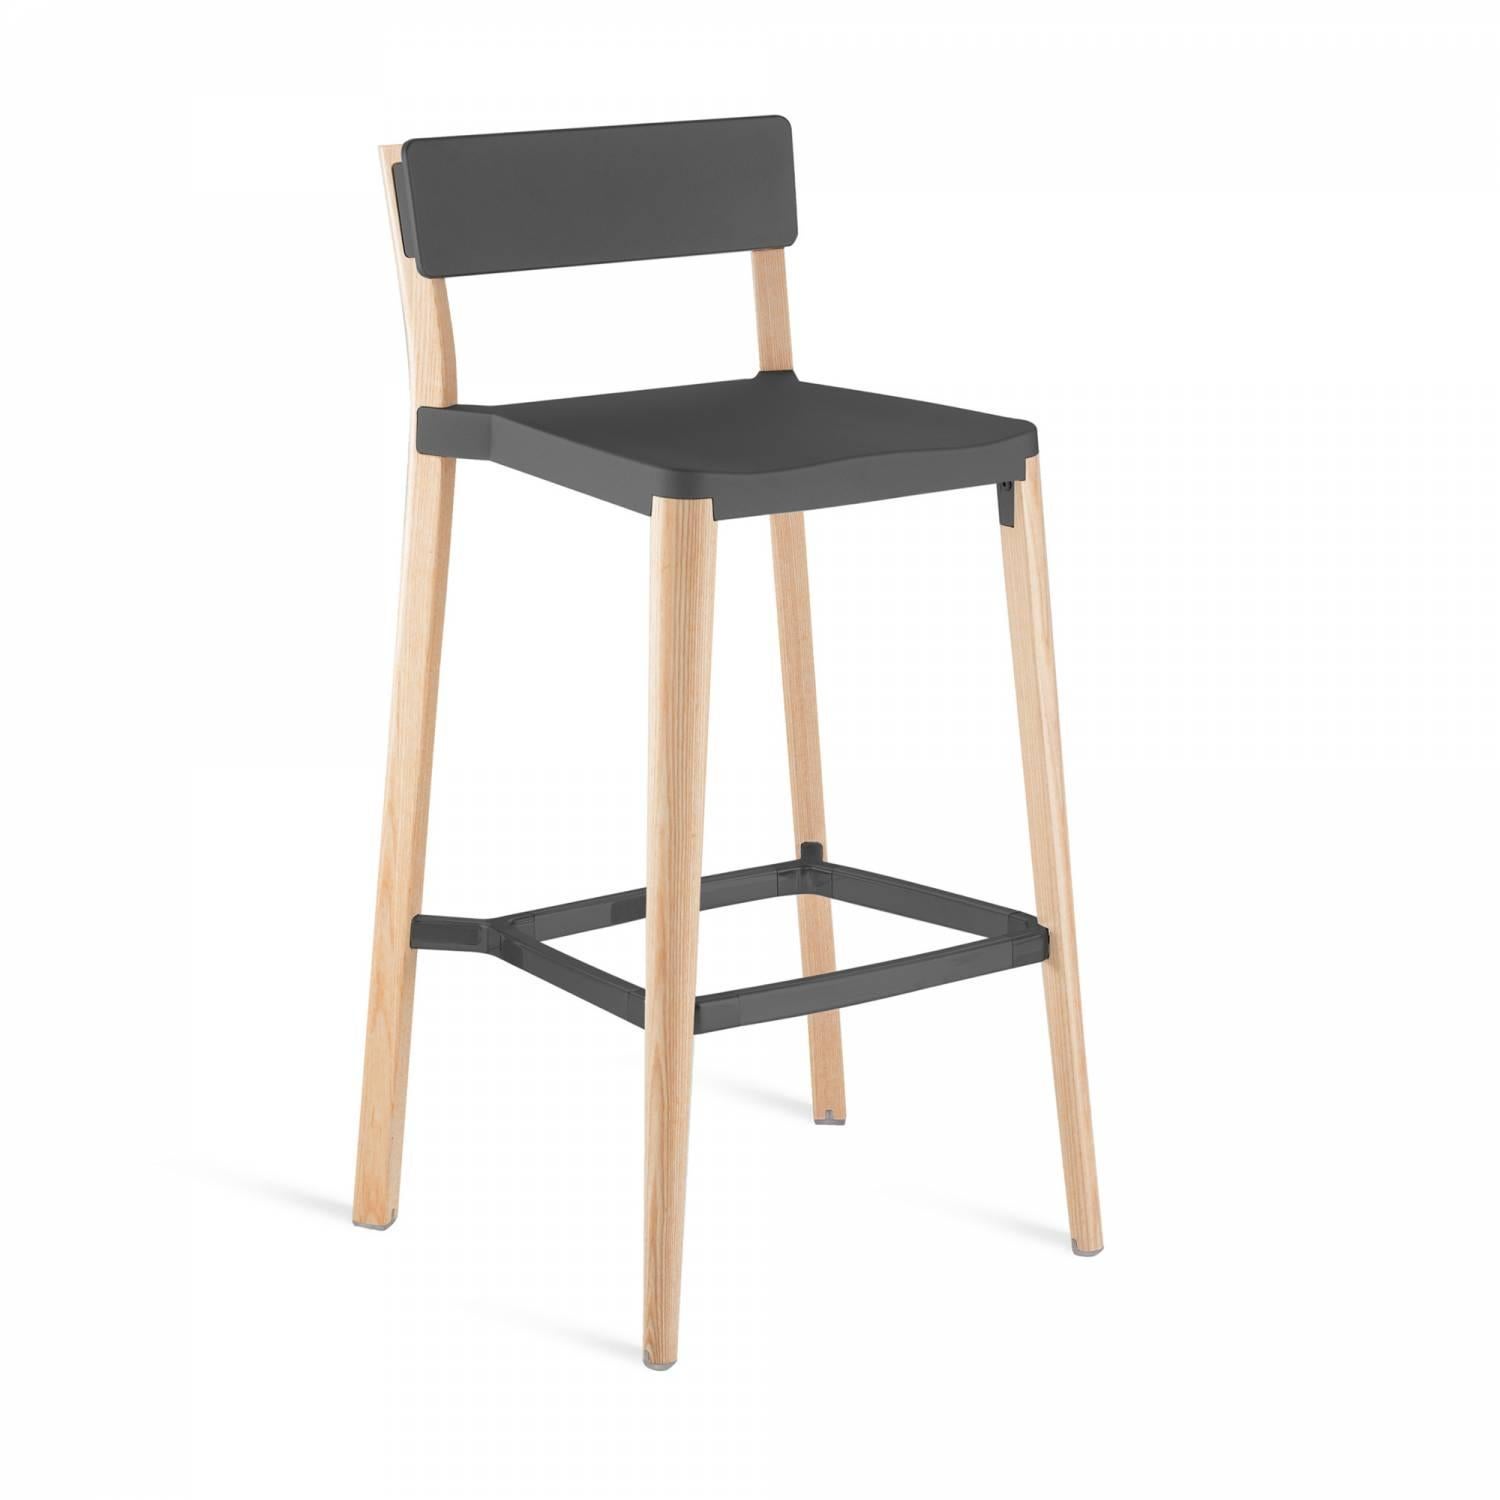 Our clients have asked us to utilize wood in our designs for years. Lancaster features a reclaimed, solid ash frame and recycled die-cast aluminum seat and back- an expression of industrial technique and warm materials.

Made of: Recycled